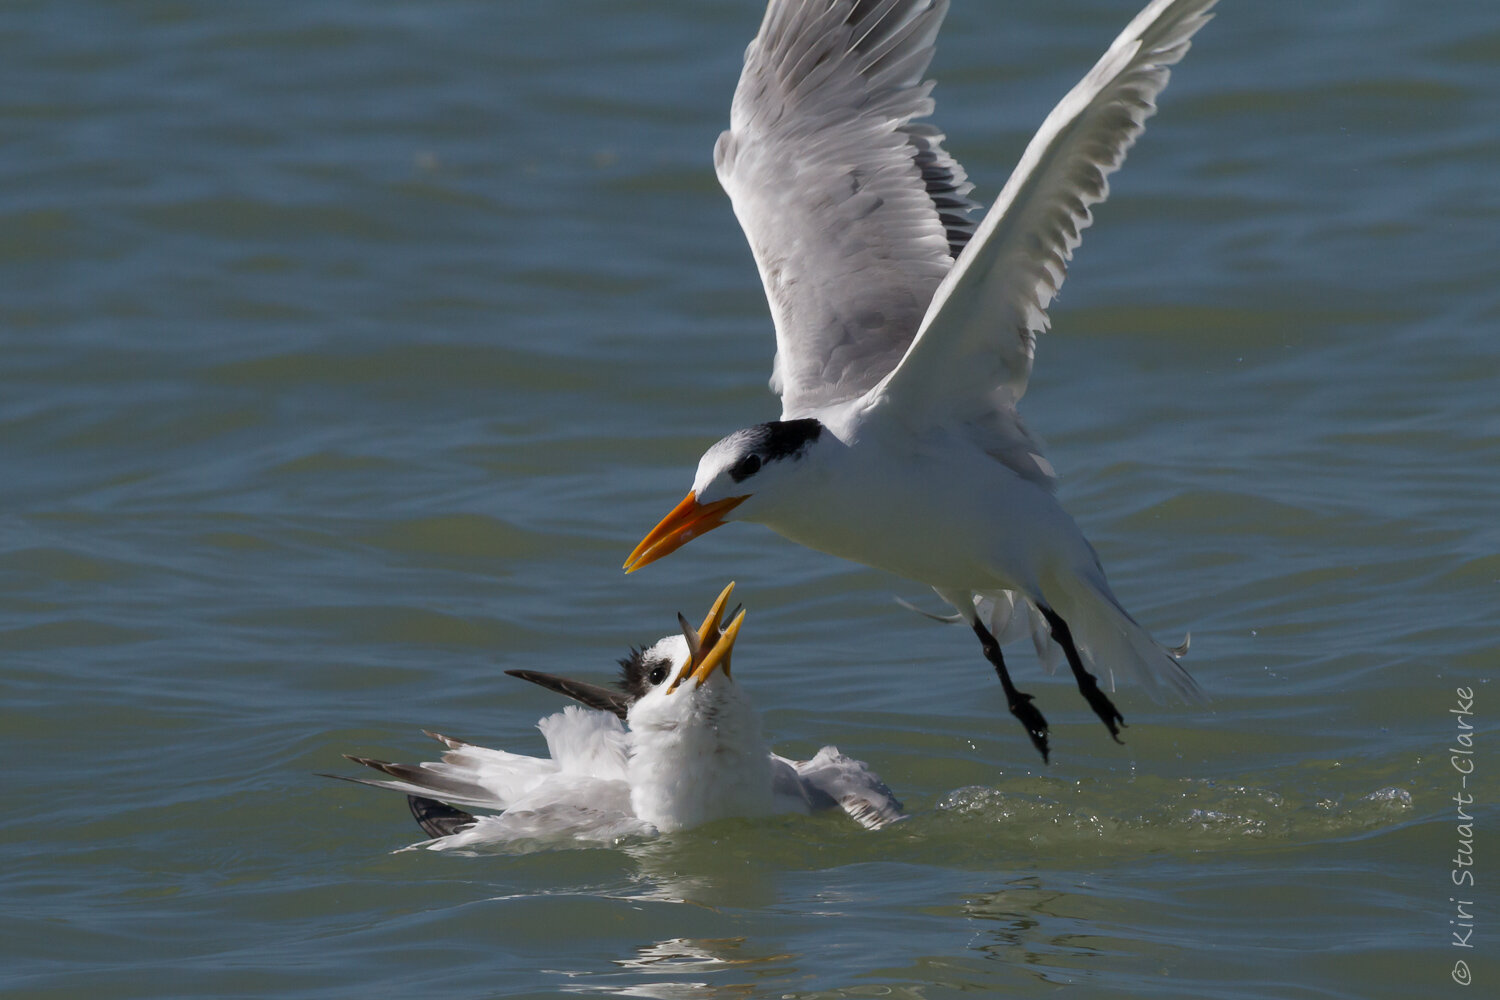  Royal tern flying away after feeding young 